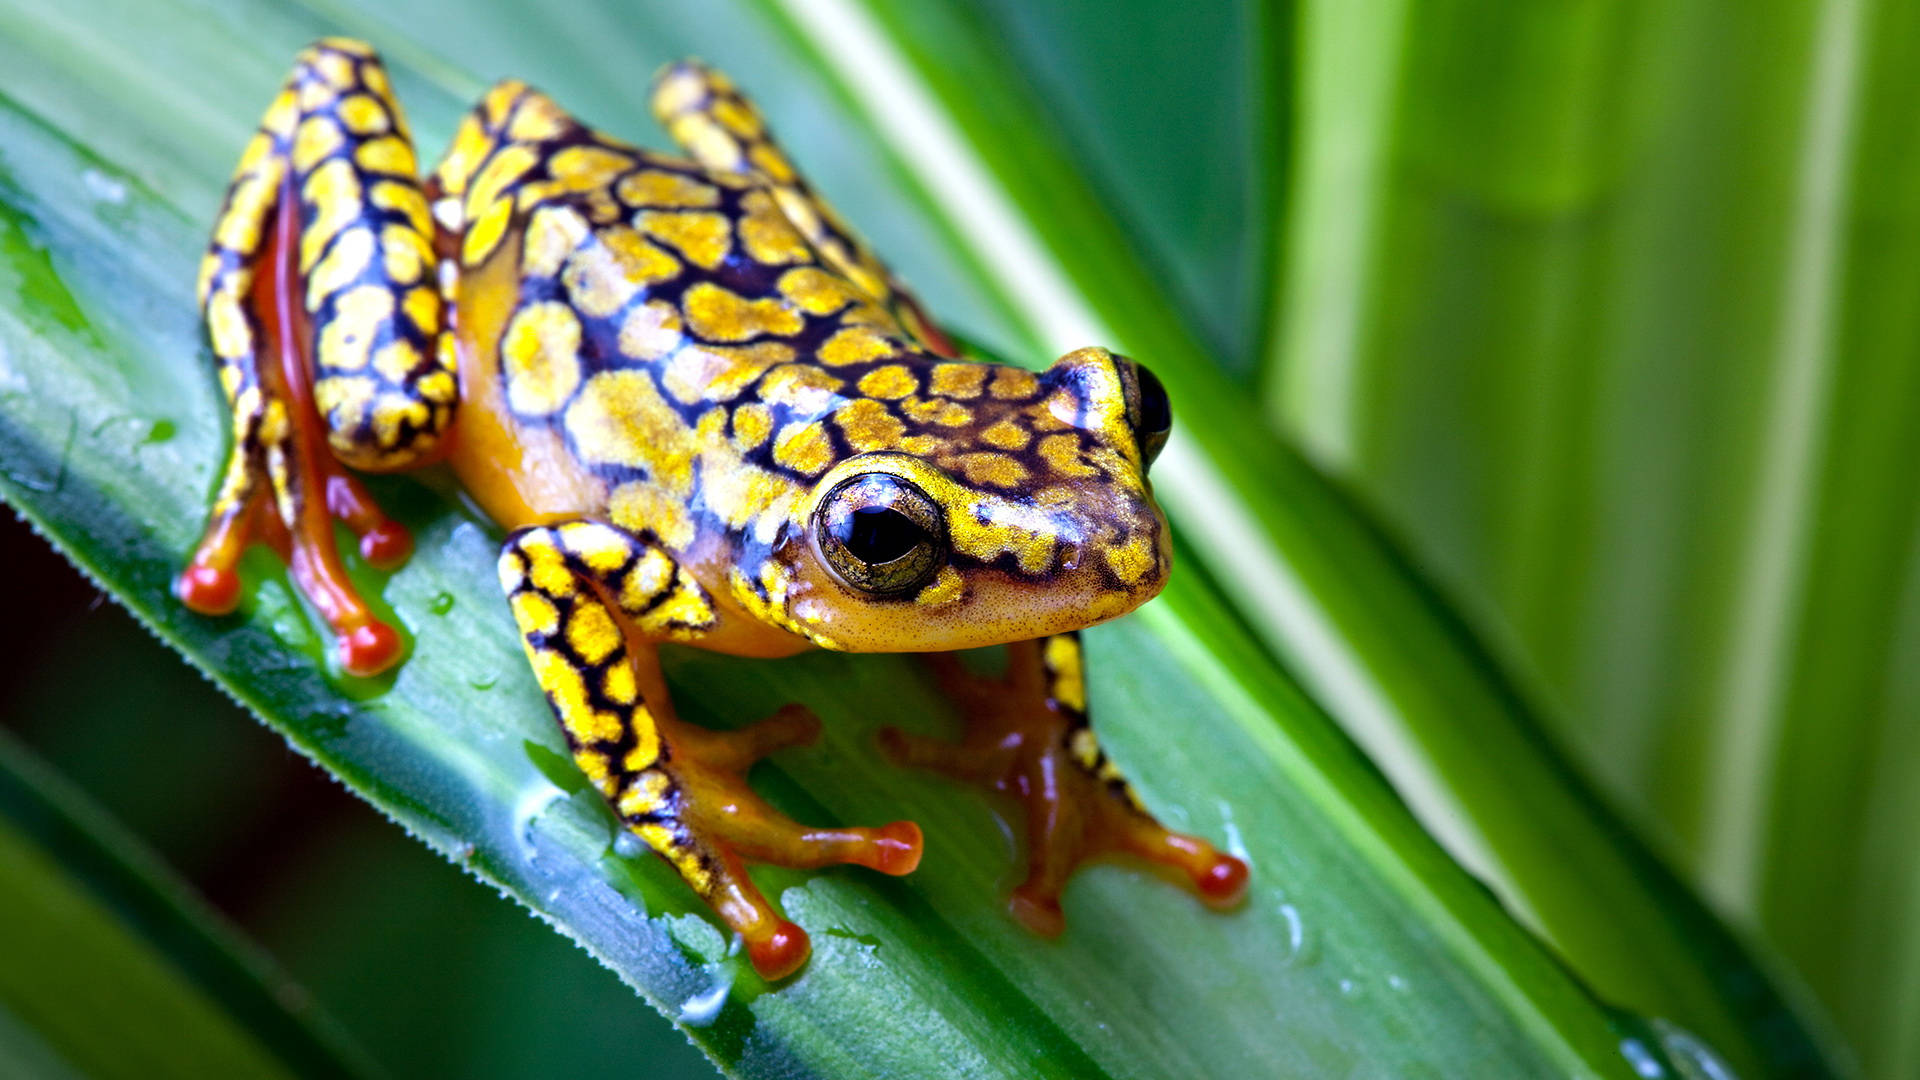 Cute Frog With Yellow Dots Pattern Background